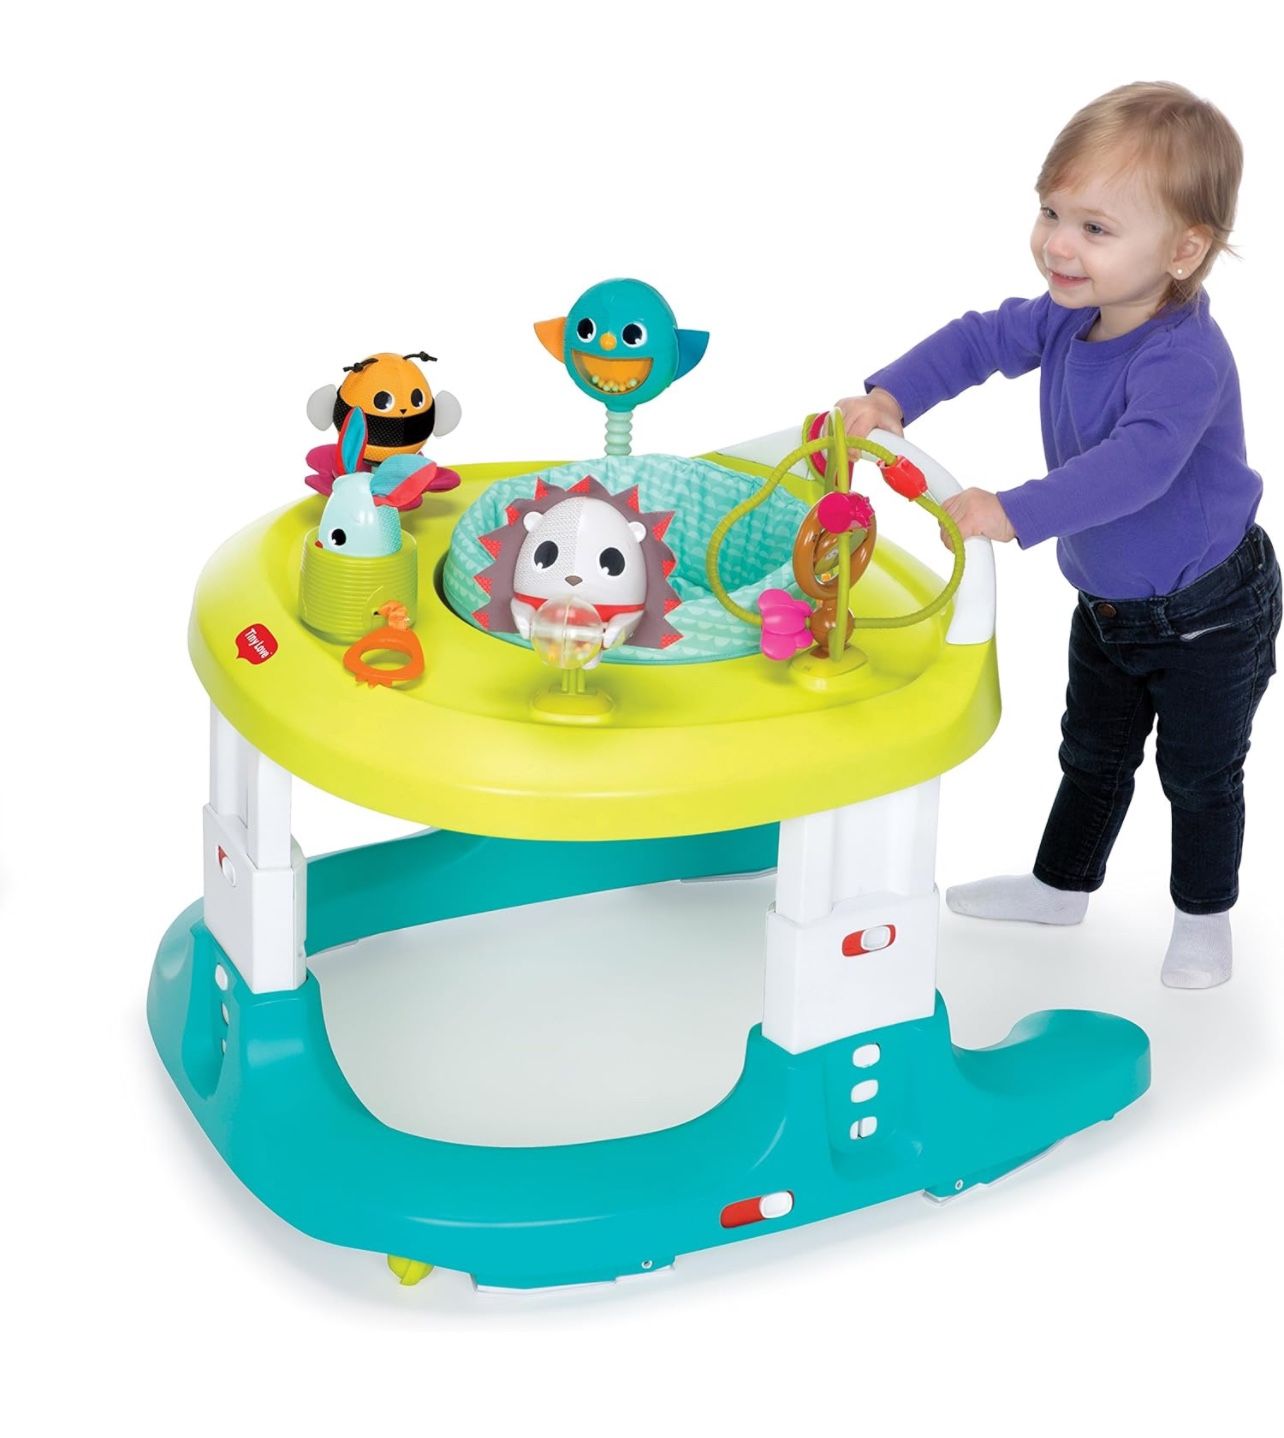 Tiny Love 4-in-1 Here I Grow Mobile Activity Center, Meadow Days